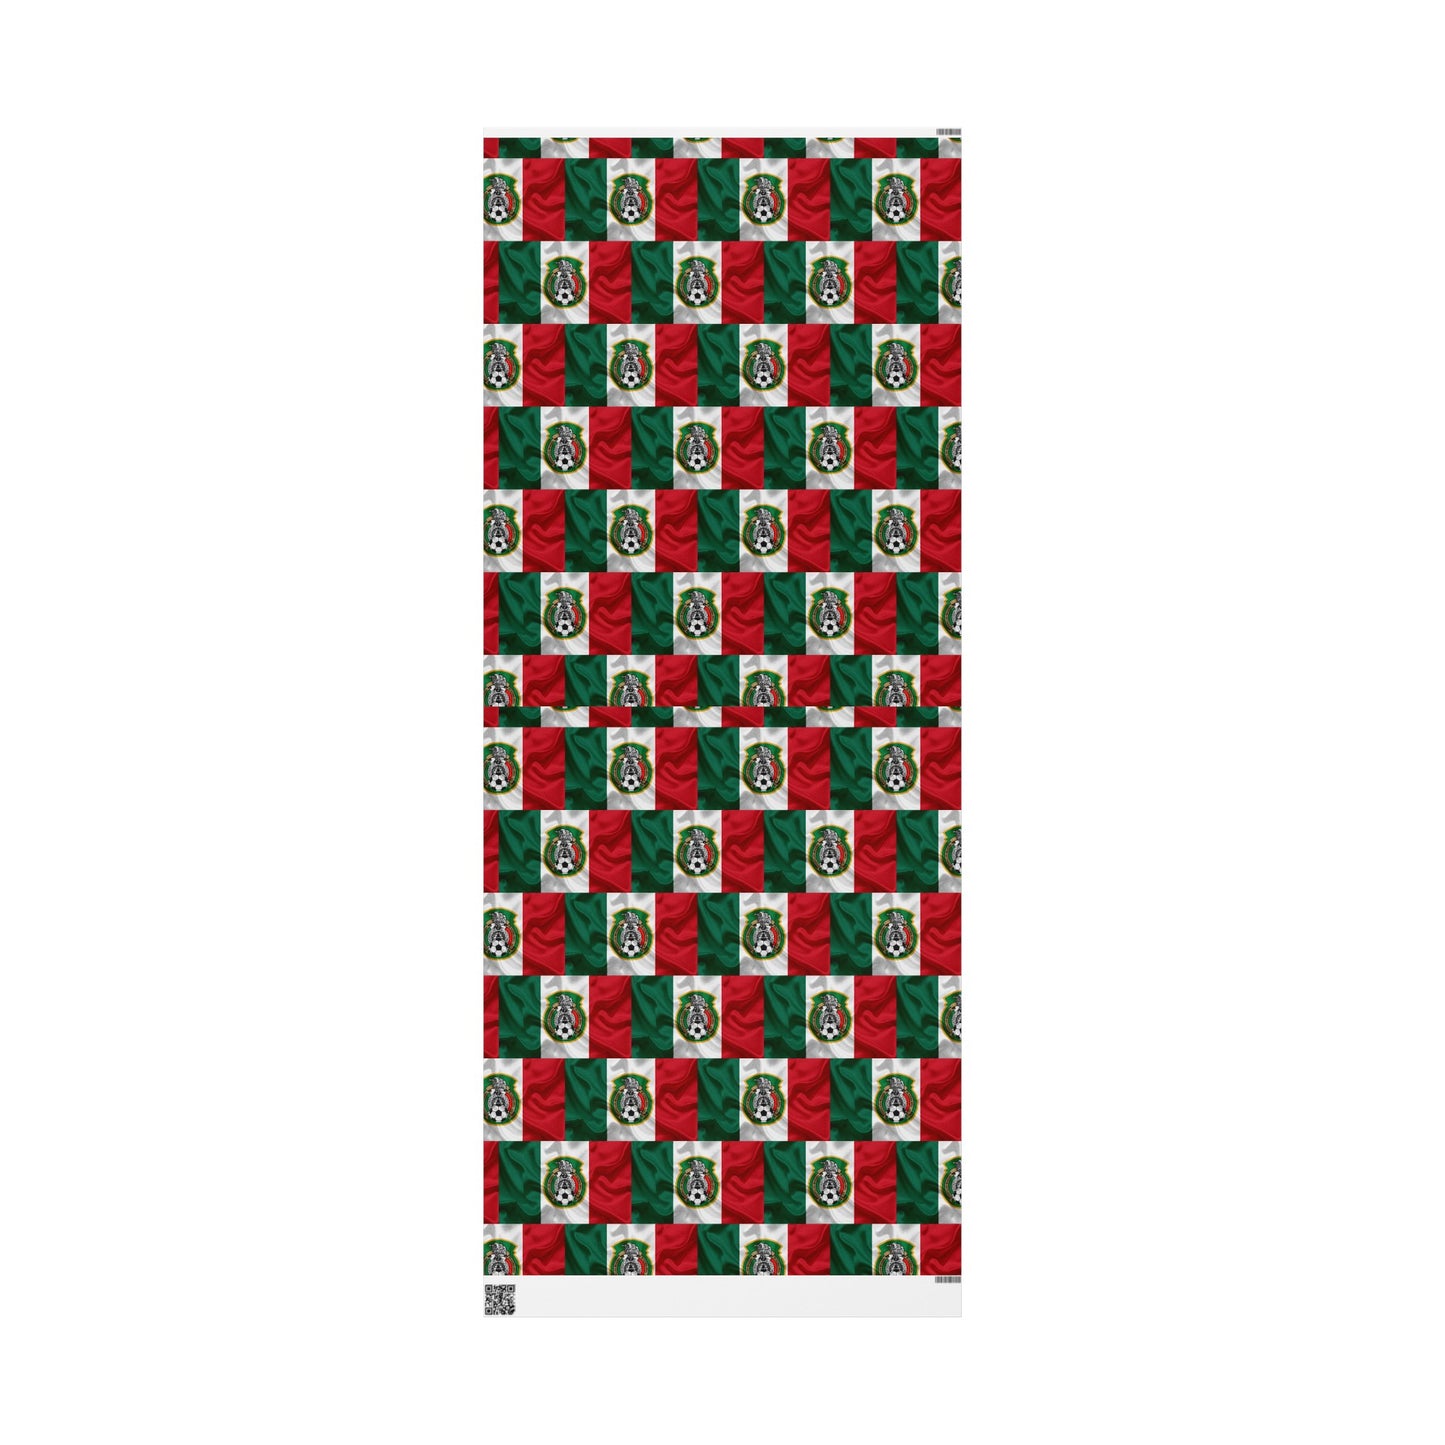 Mexico National Team Futbol Flag Birthday Gift Wrapping Paper football soccer Holiday